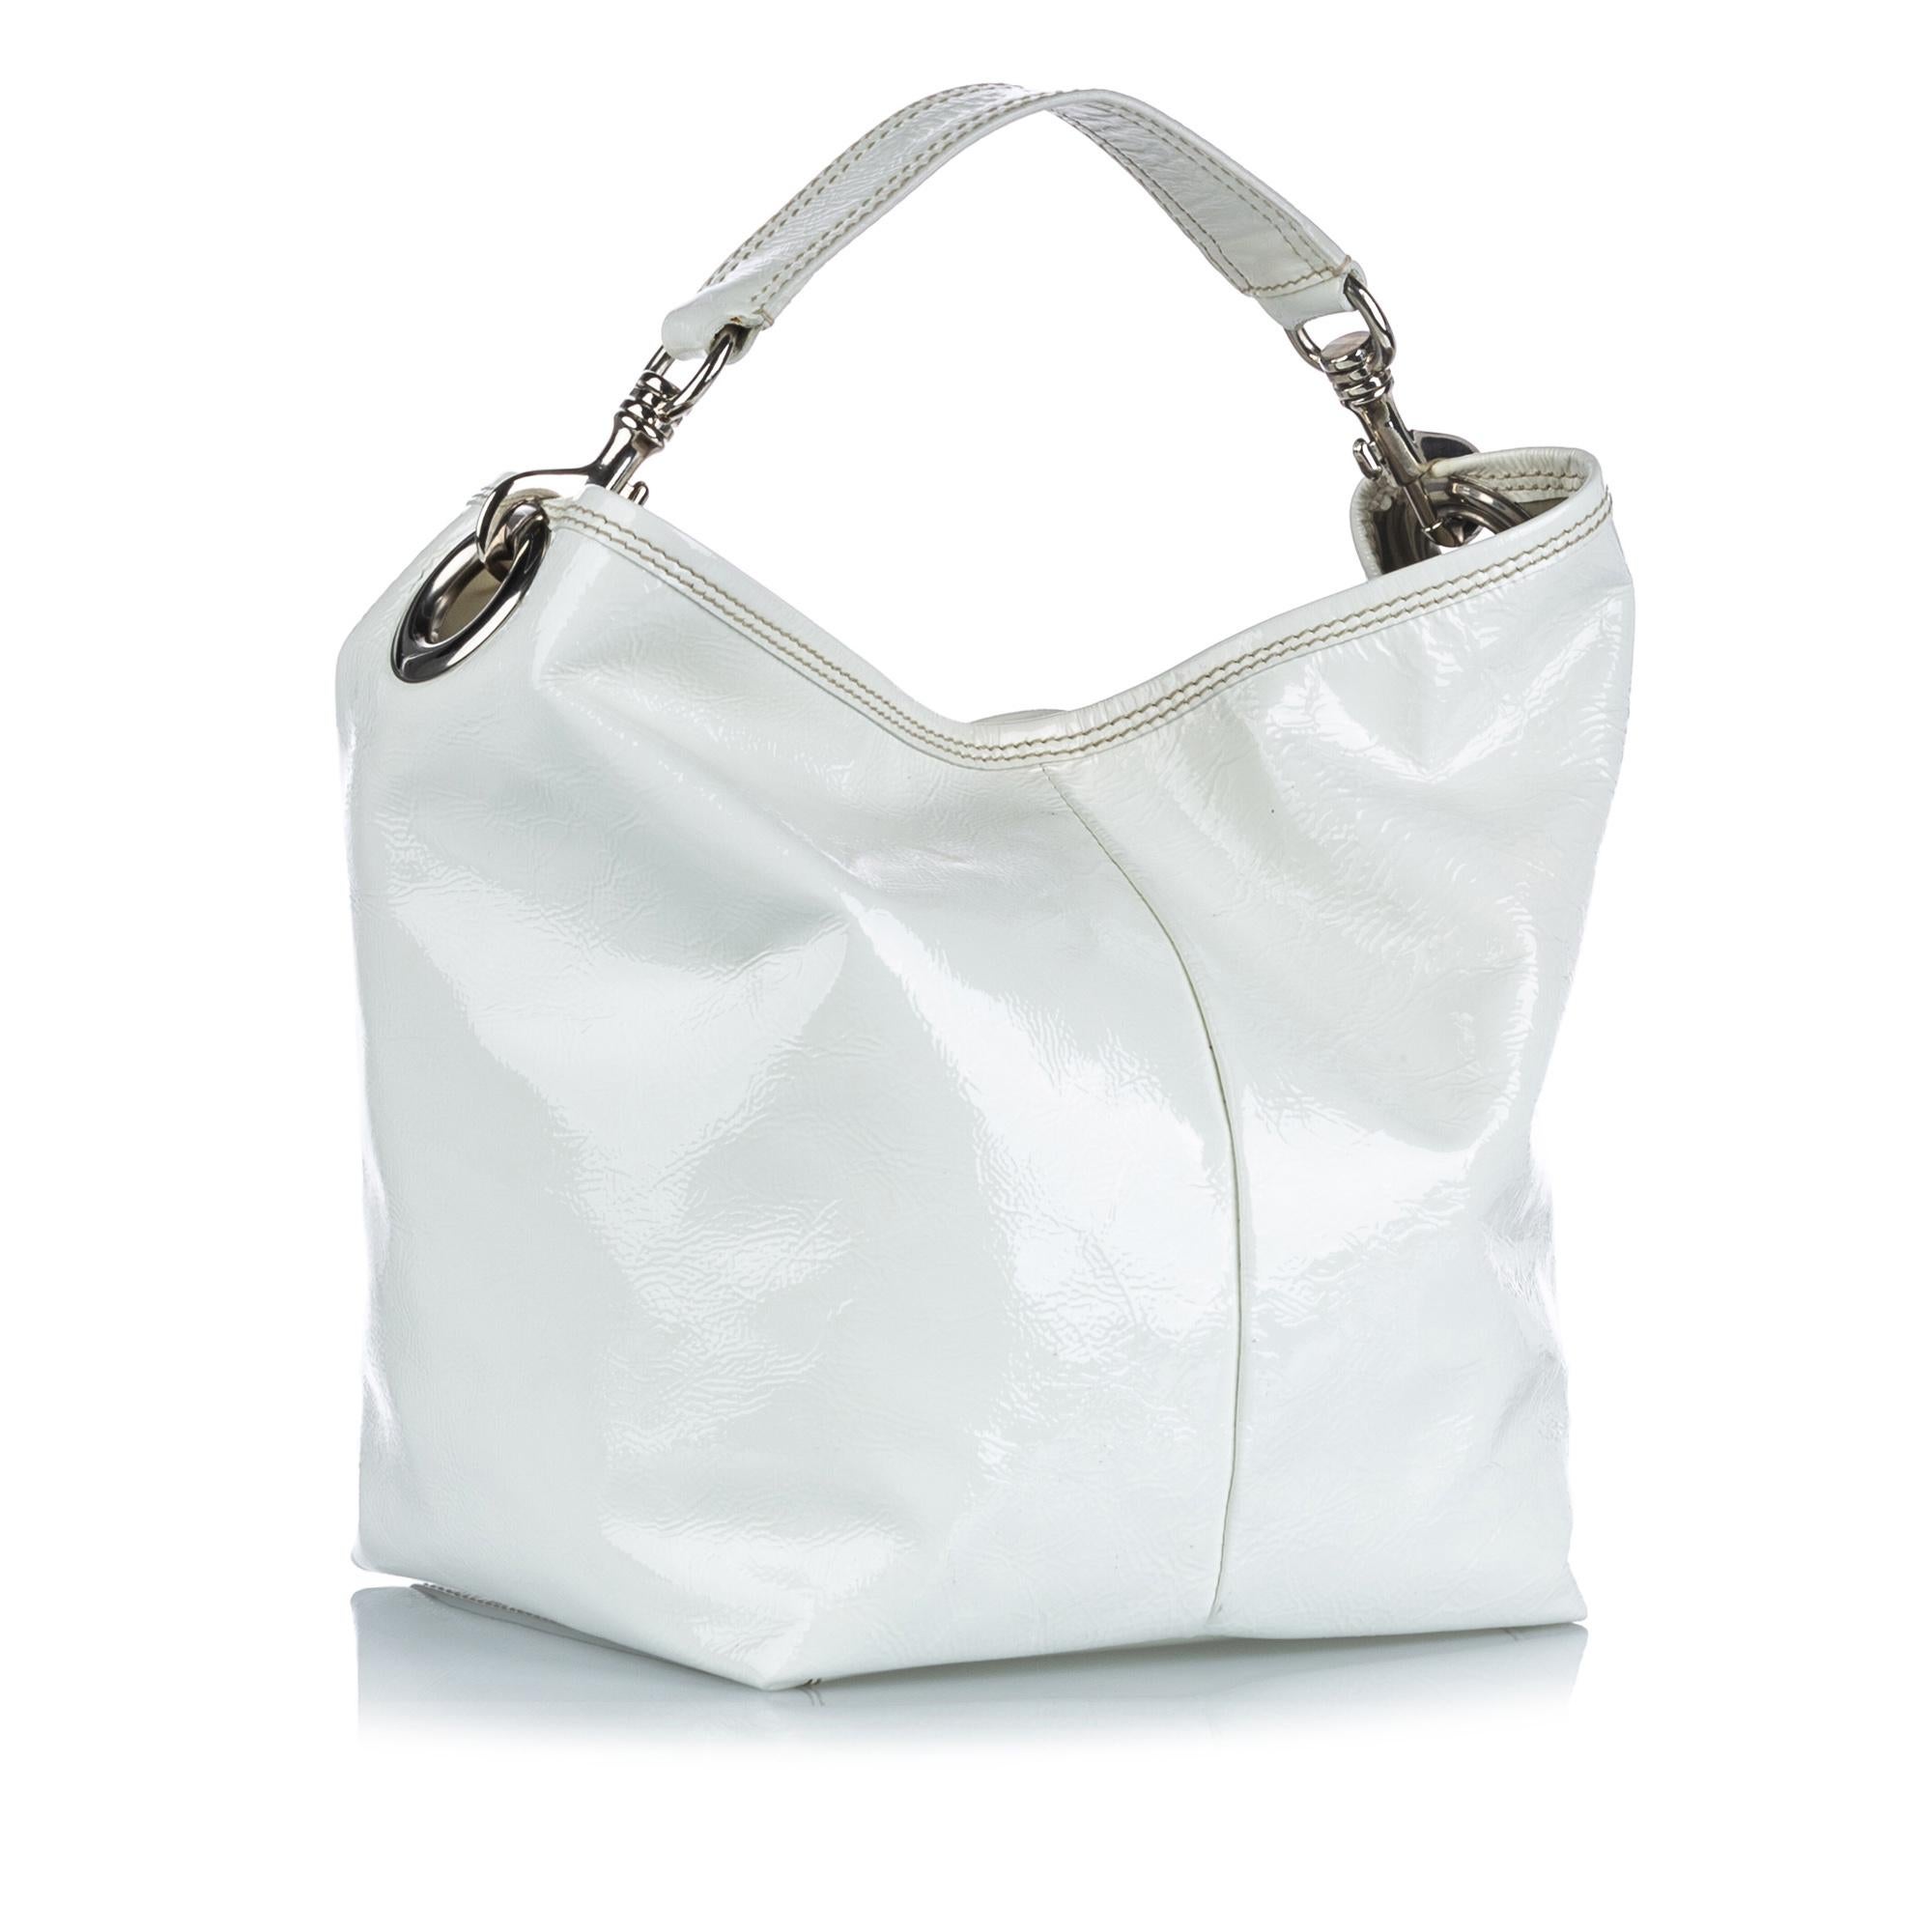 This shoulder bag features a patent leather body, a flat leather strap, an open top with a magnetic snap button closure, and an interior zip pocket. It carries as AB condition rating.

Inclusions: 
Dust Bag
Dimensions:
Length: 28.00 cm
Width: 32.00